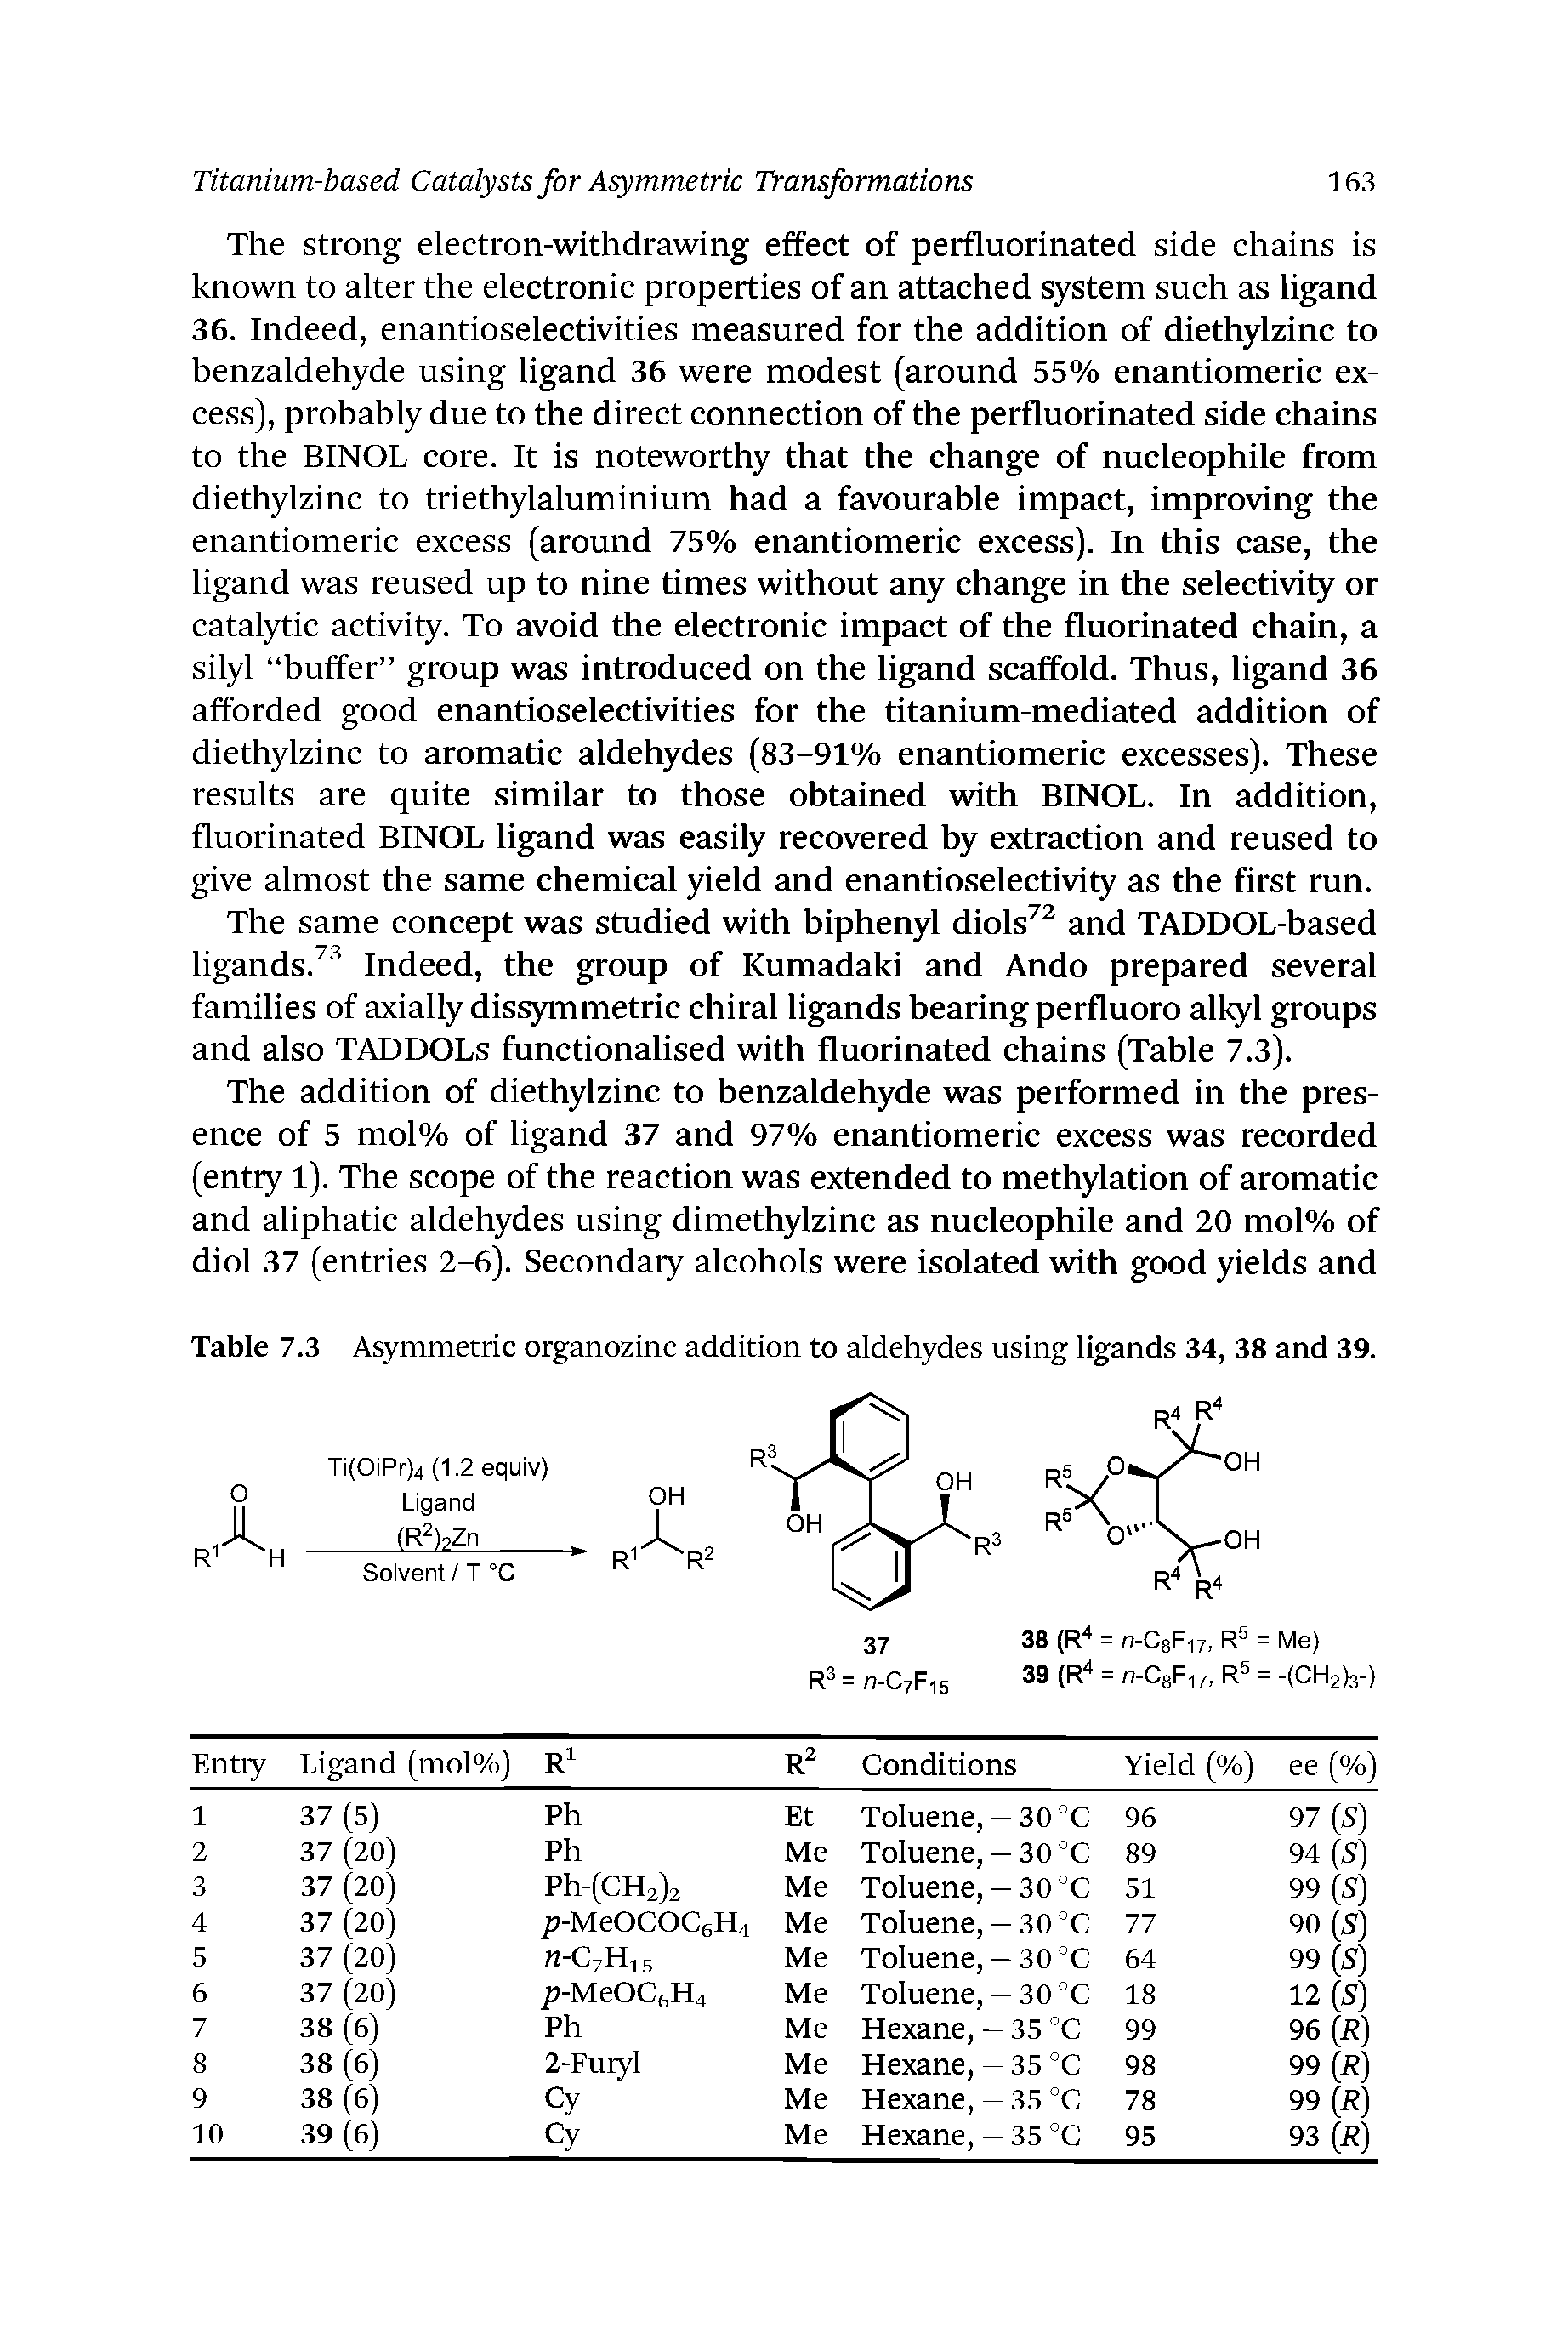 Table 7.3 Asymmetric organozinc addition to aldehydes using ligands 34, 38 and 39.